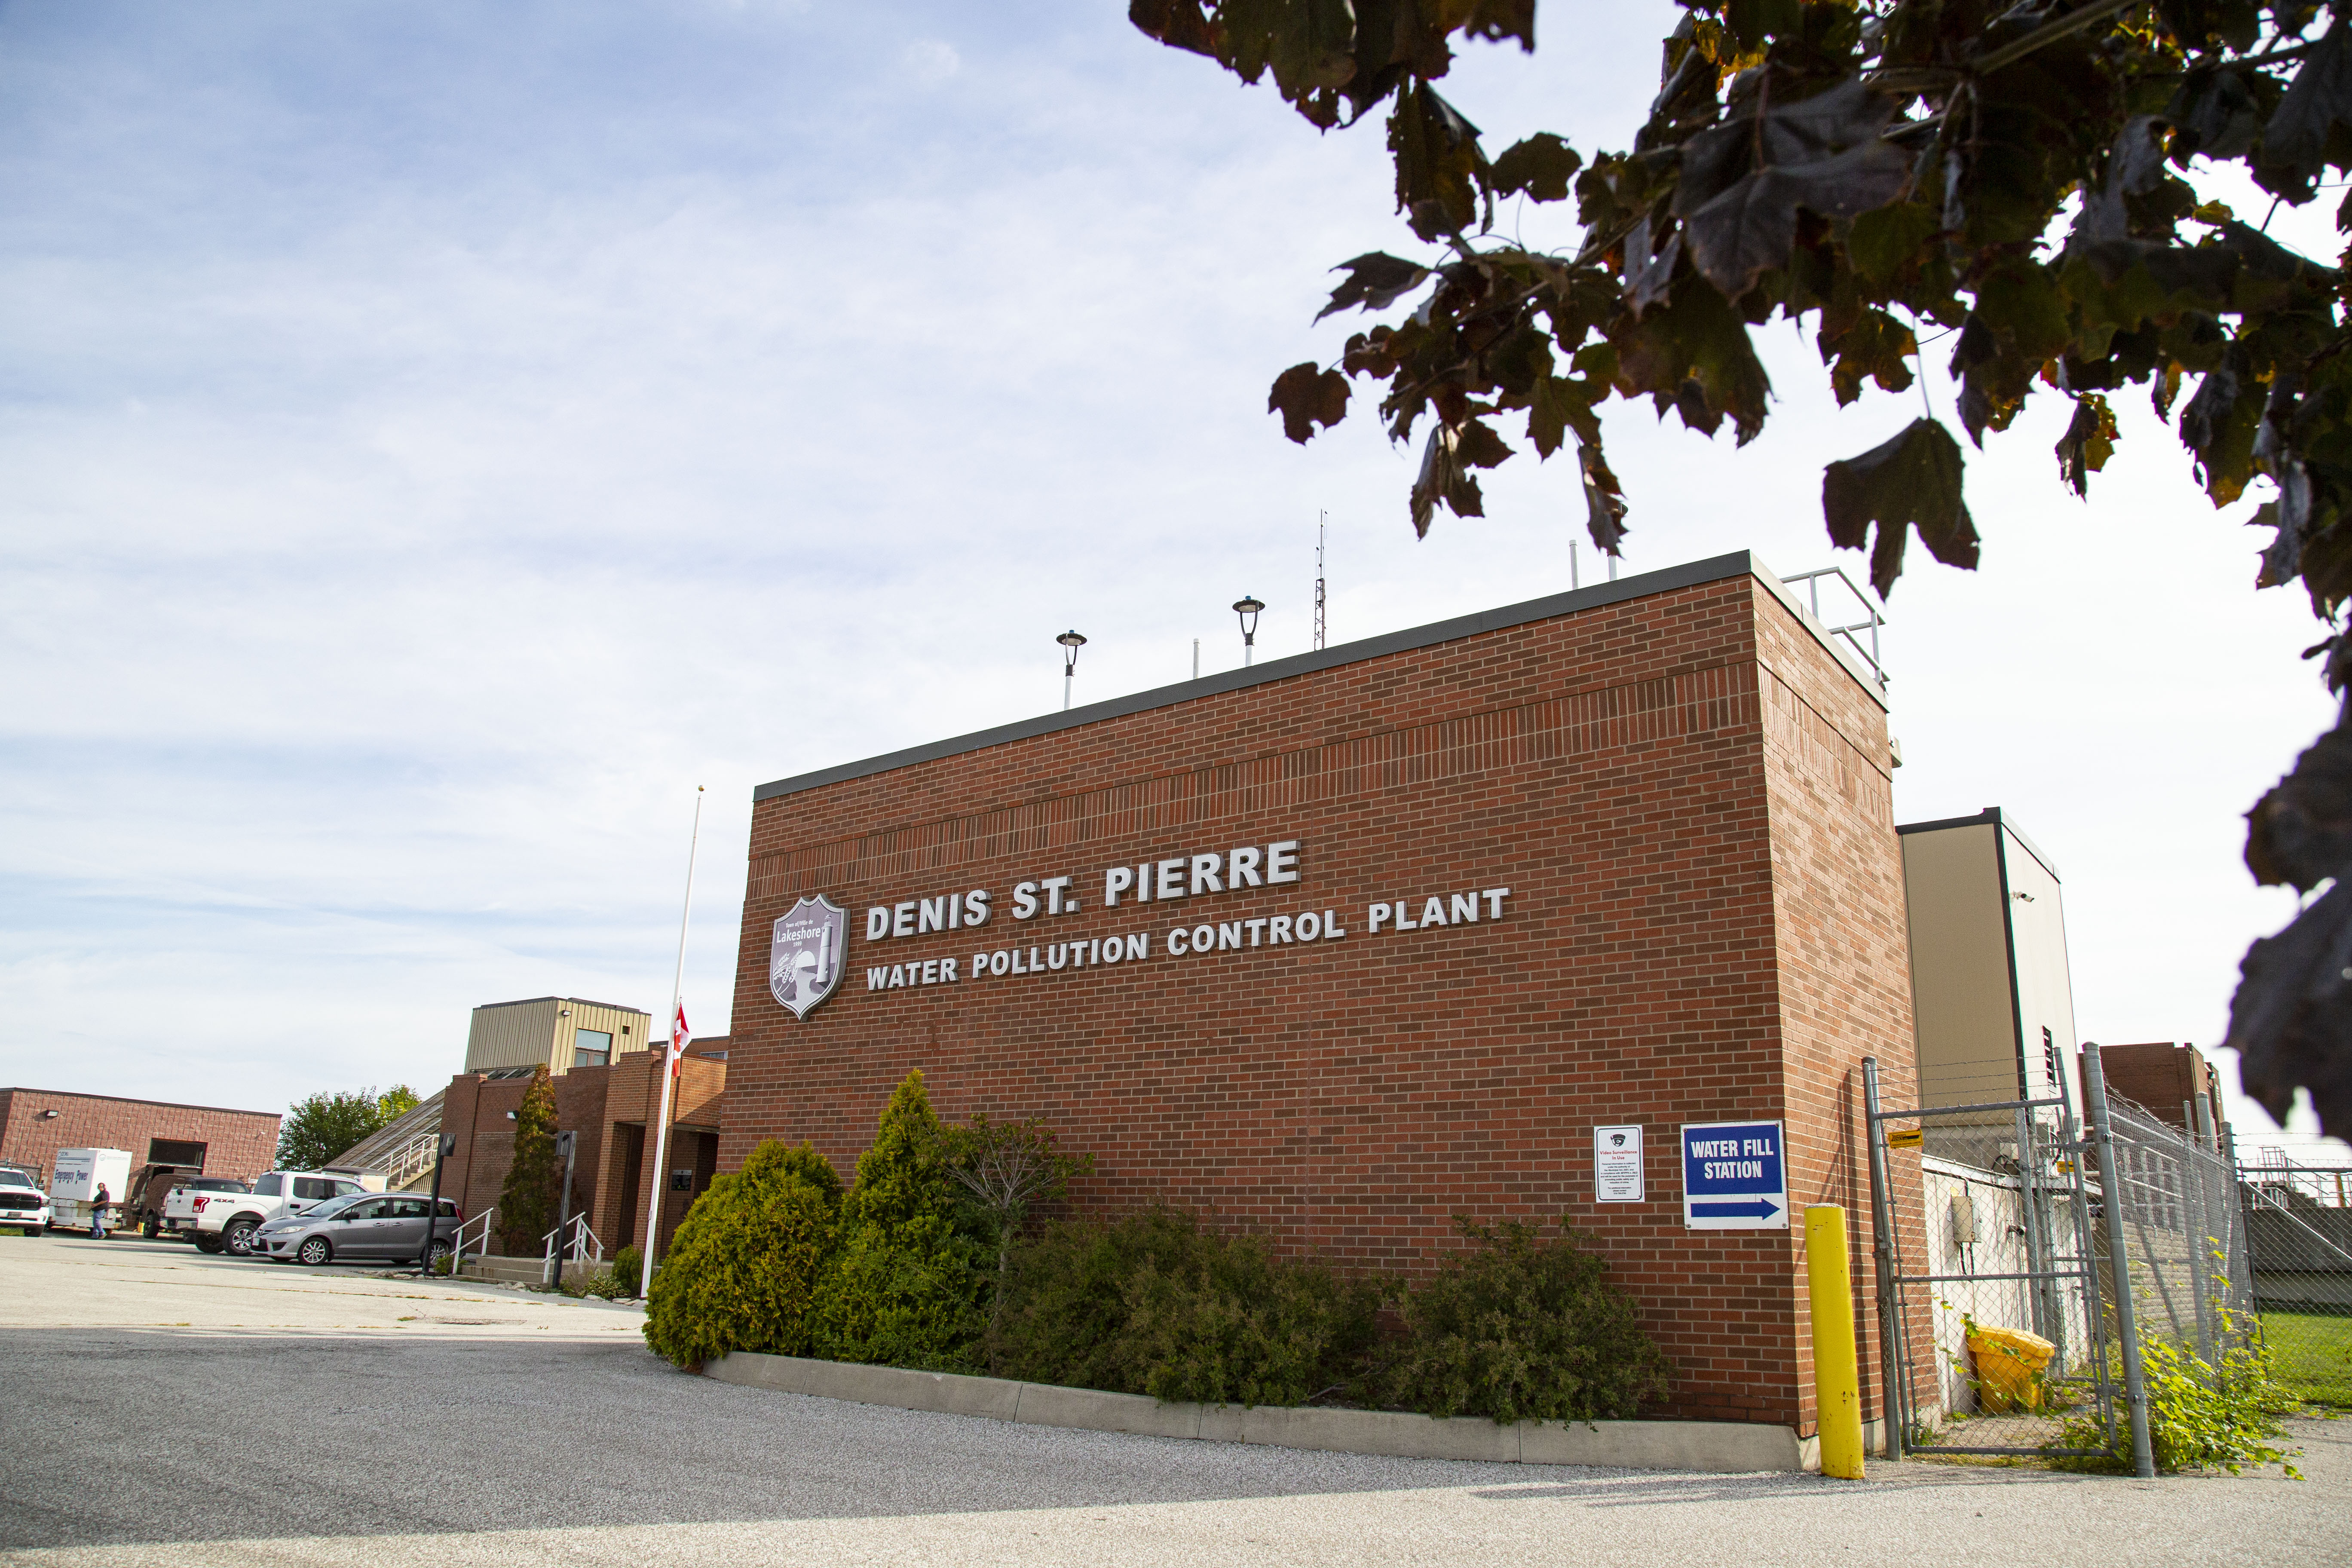 Photo of front of Denis St. Pierre Water Pollution Control Plant